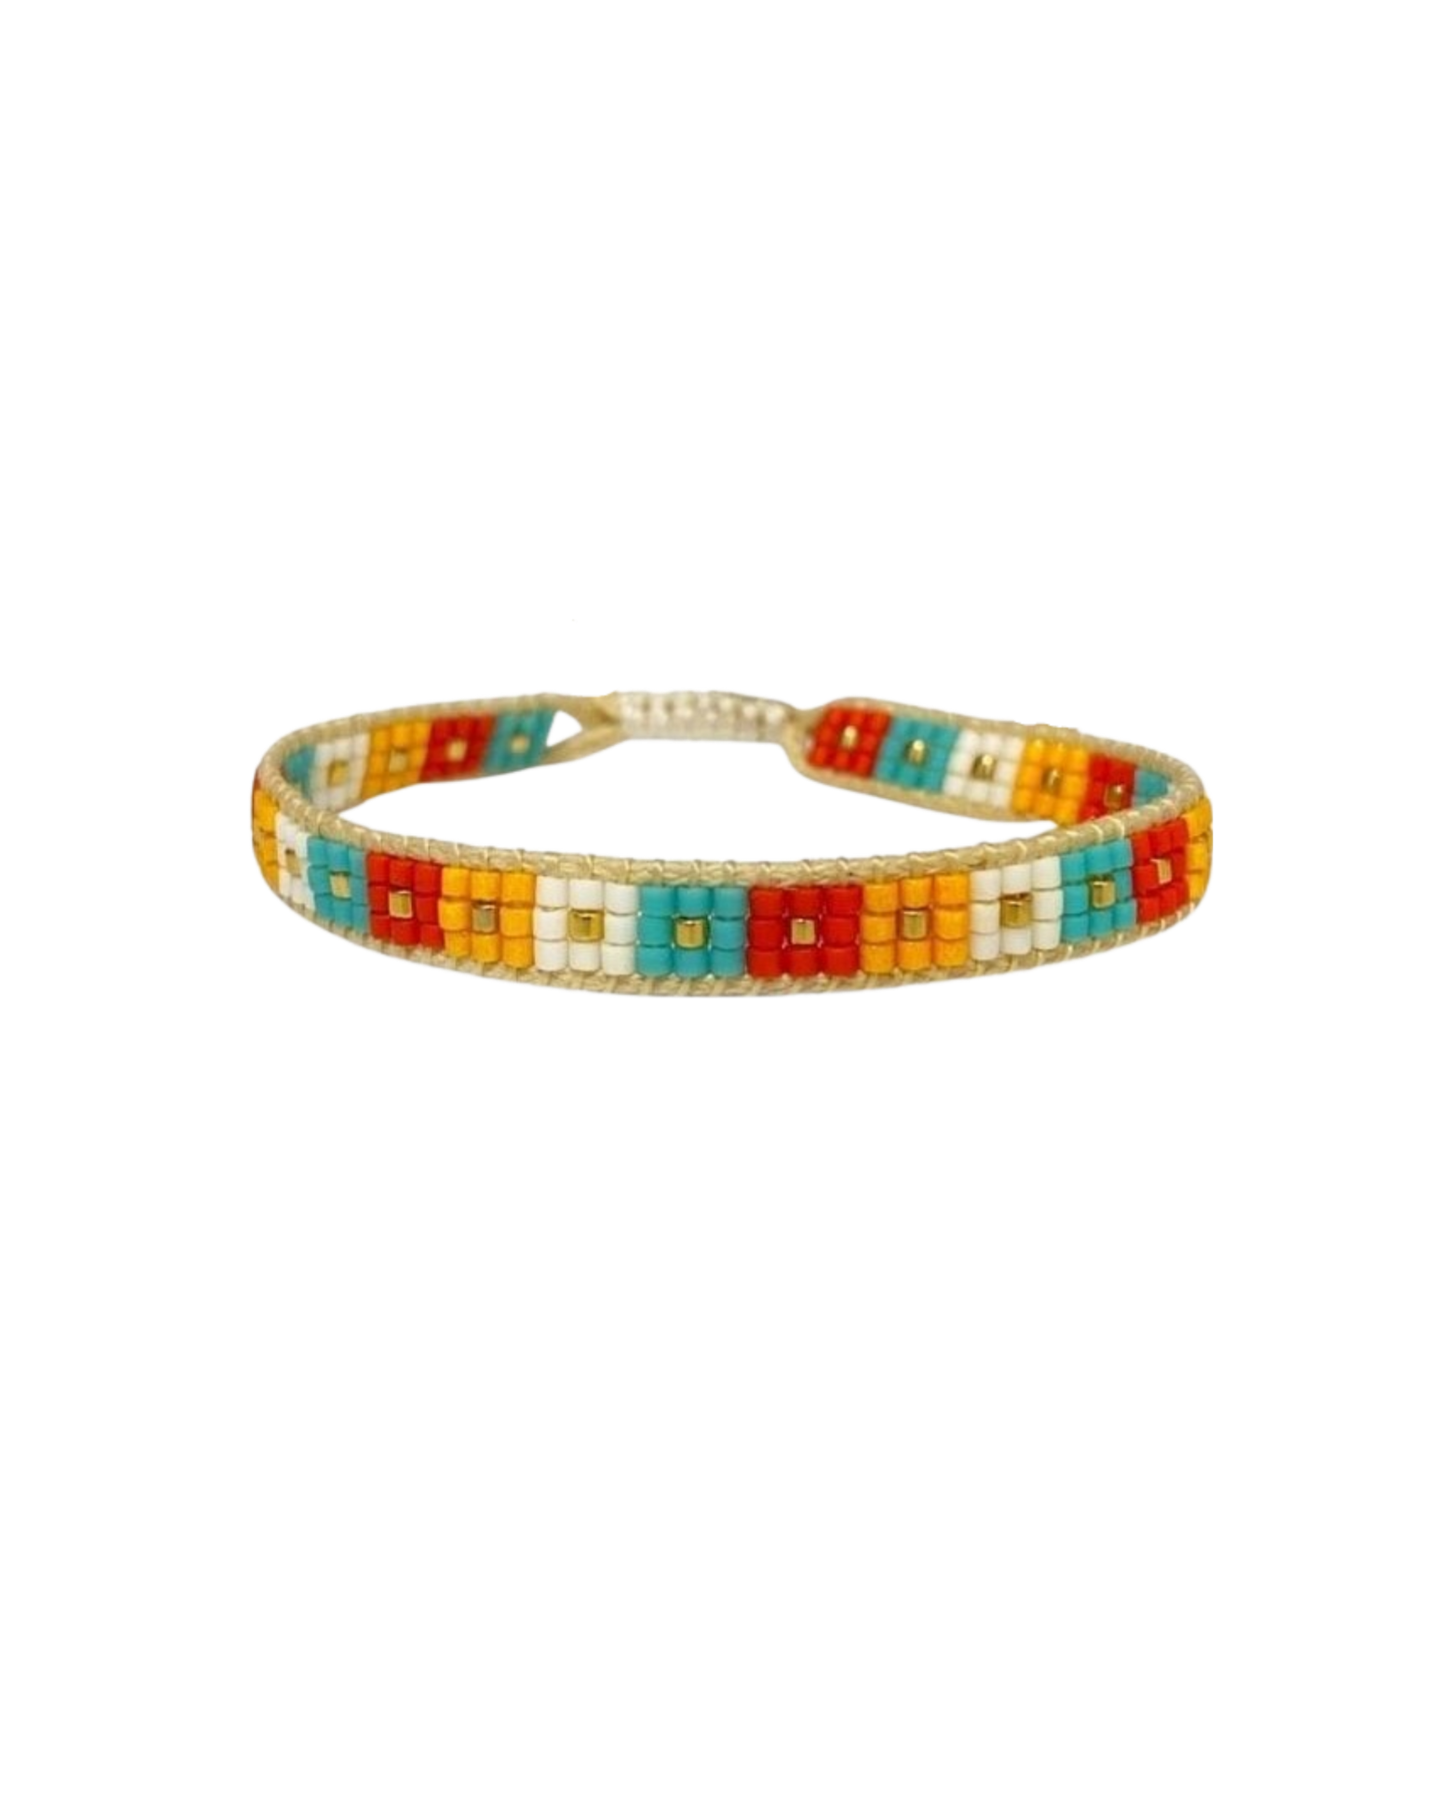 beaded-bracelet with checkered design in bright colors